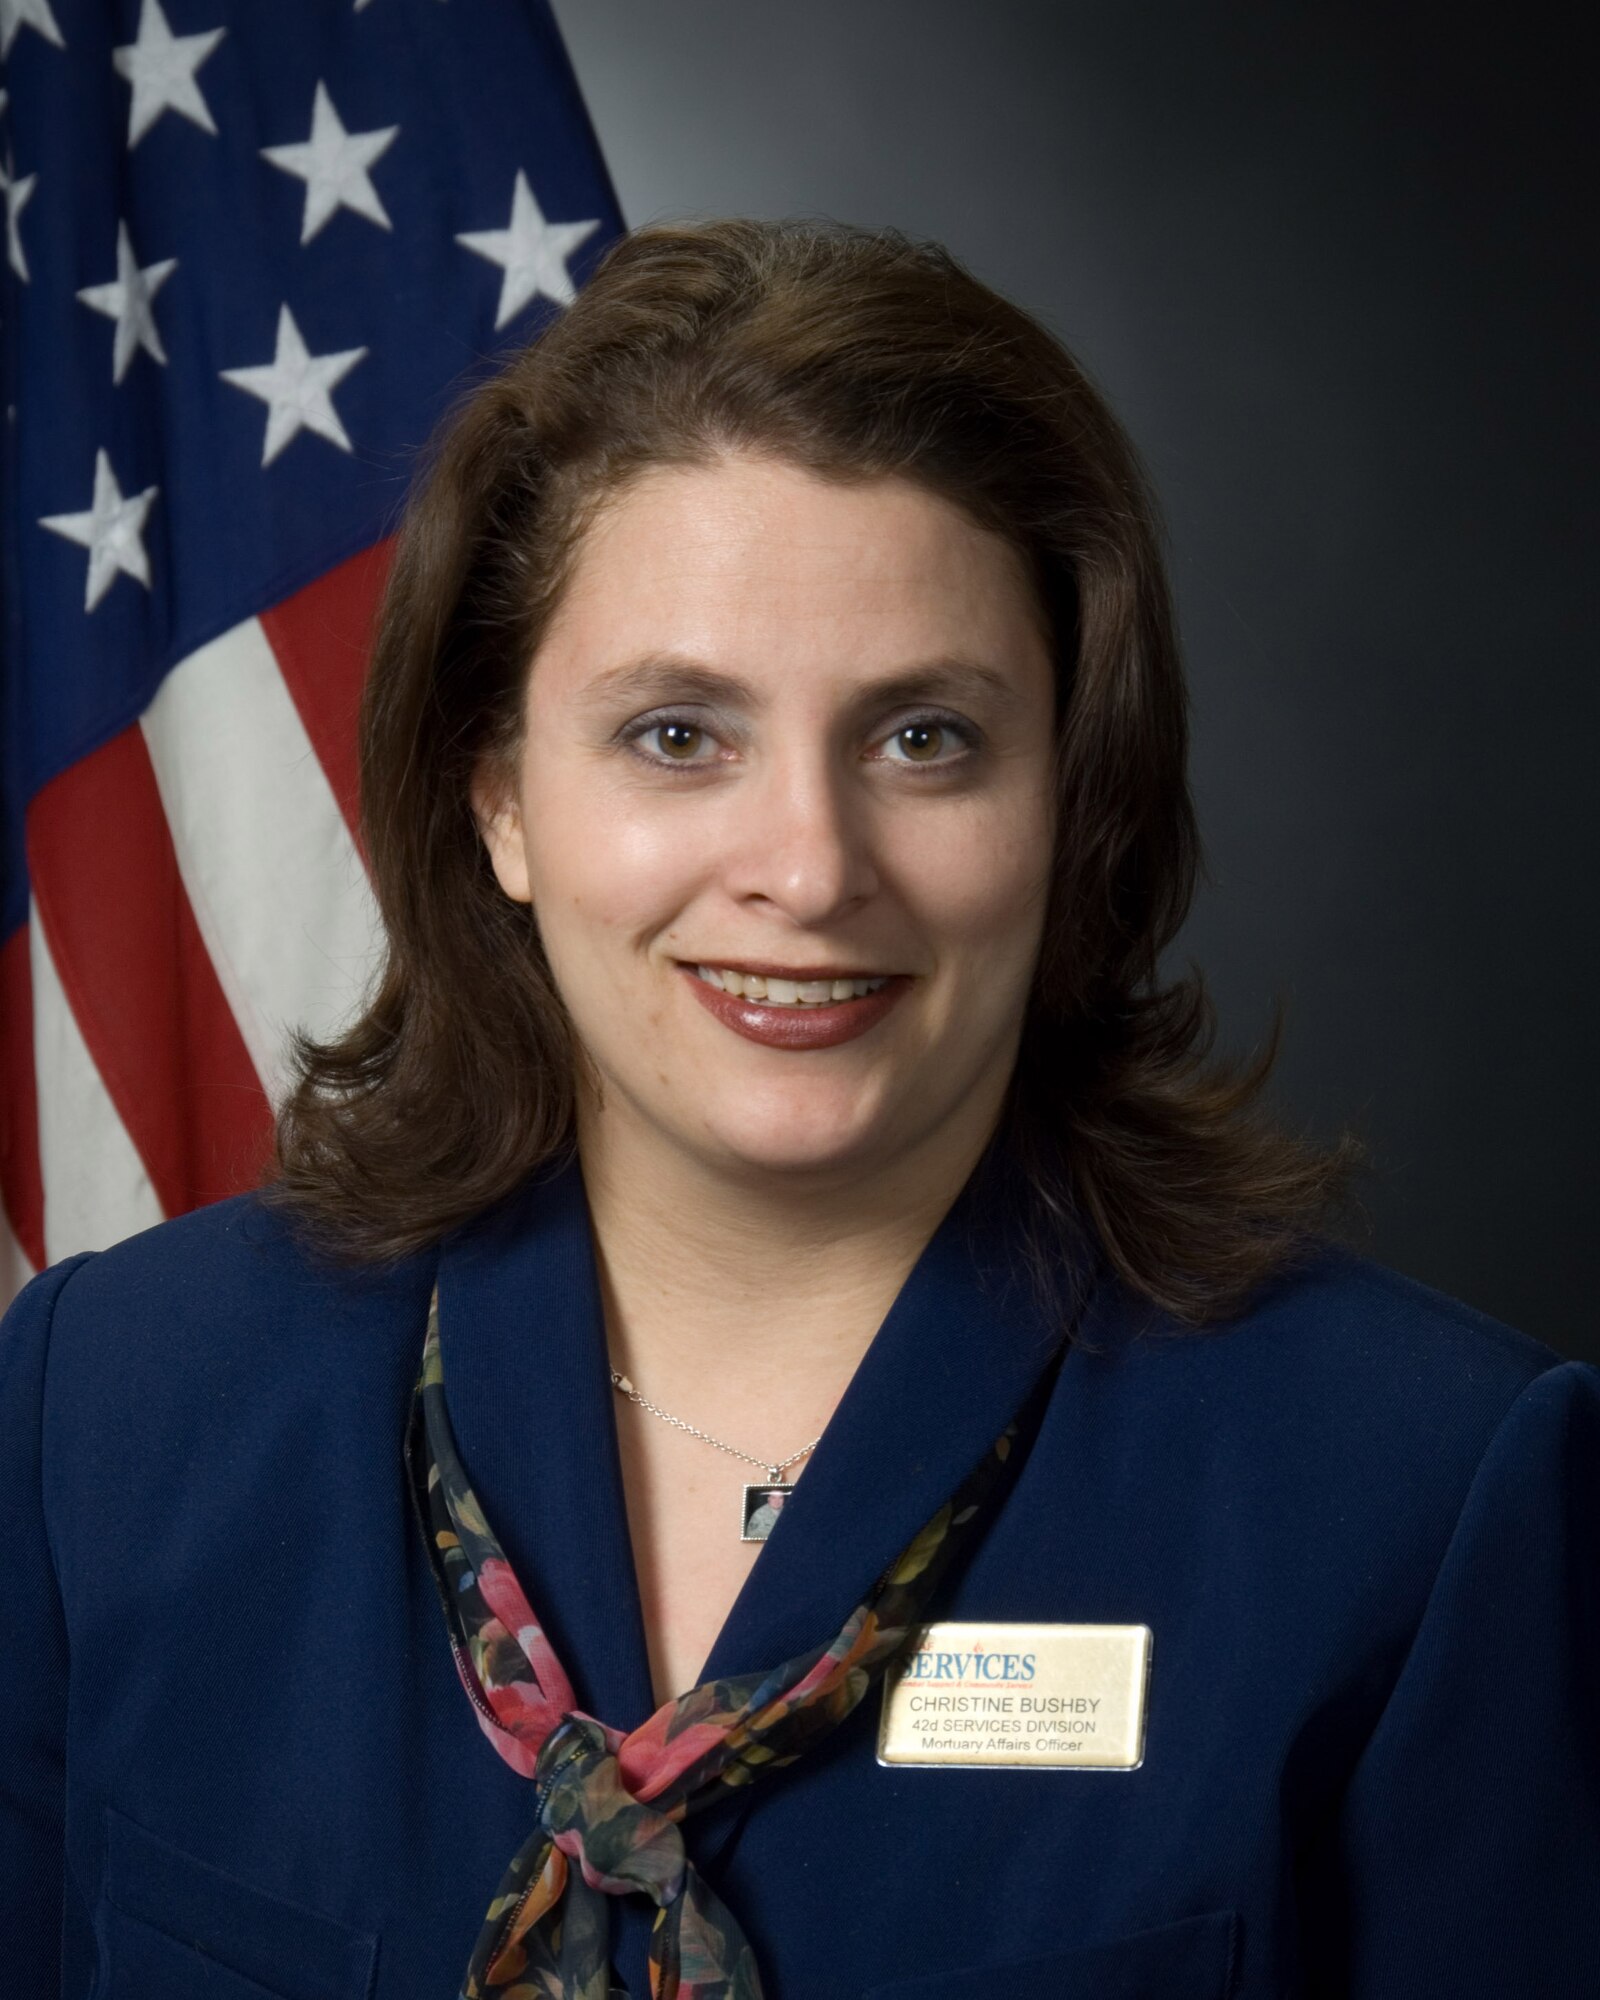 Christine E. Bushby, 42nd Air Base Wing, is the Air University Category II Civilian of the Year for 2008. (Air Force photo)